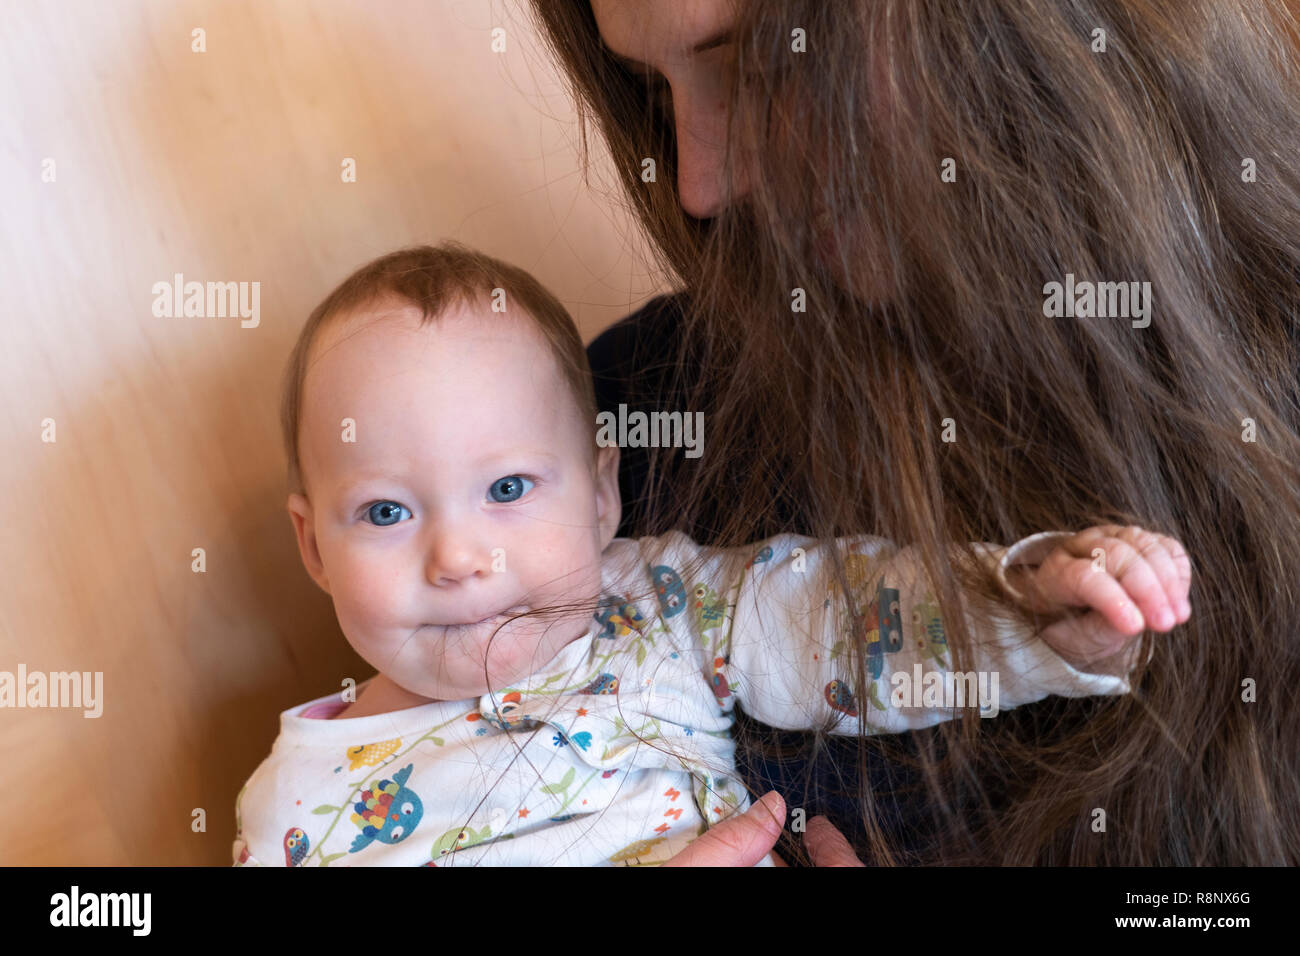 A baby girl being held by her mother and playing with her mother's hair Stock Photo